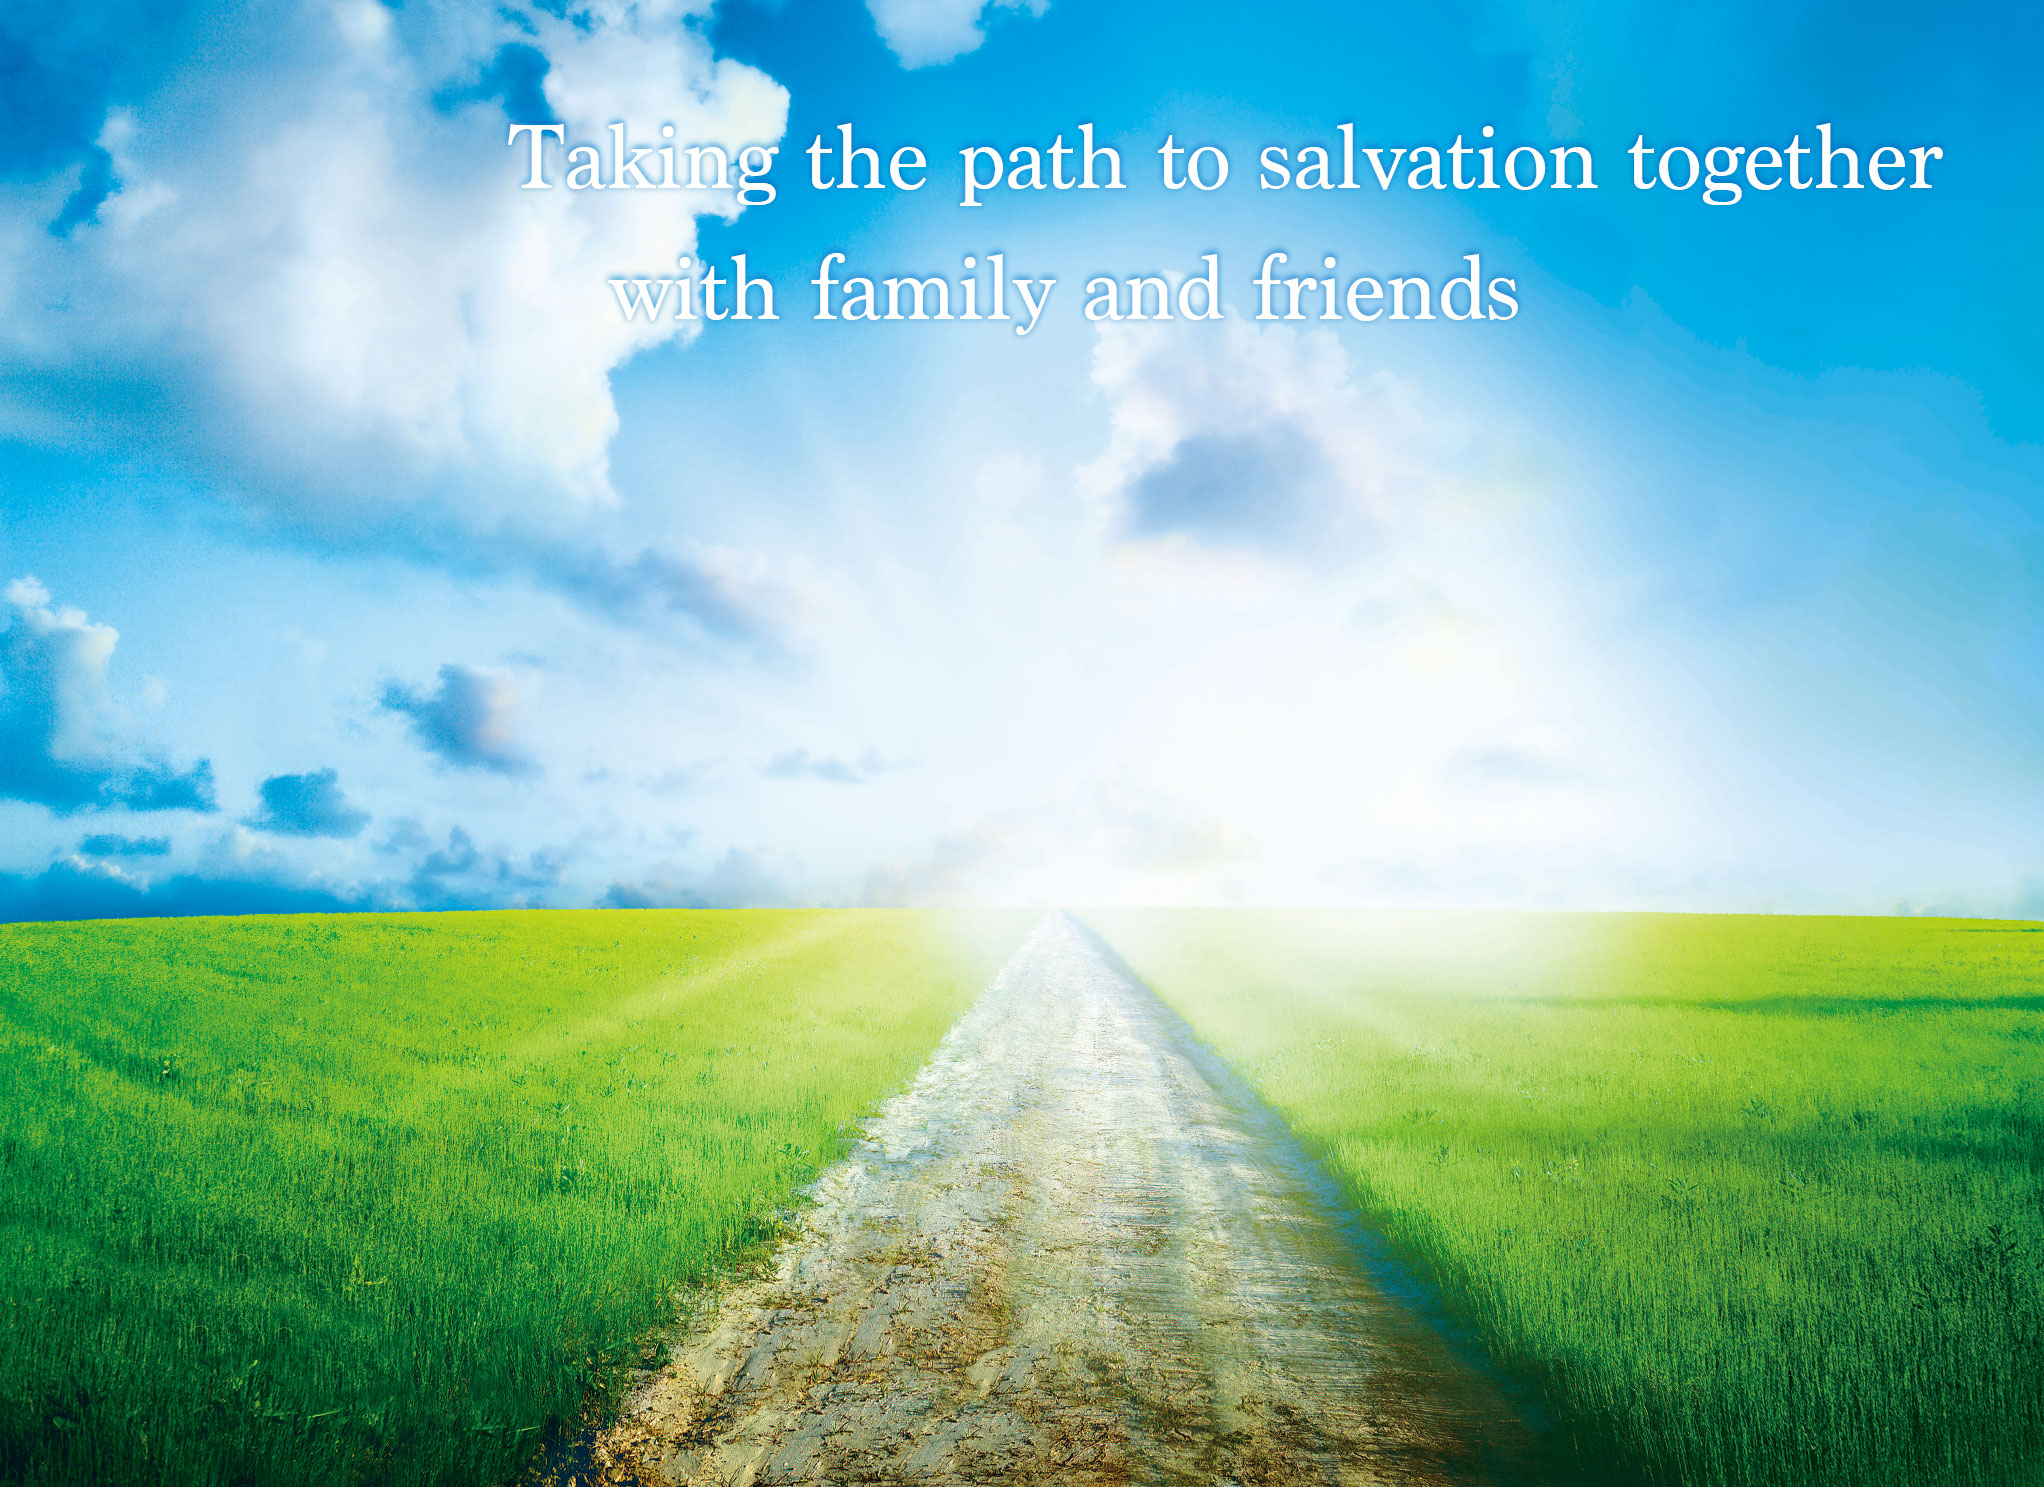 Taking the path to salvation together with family and friends